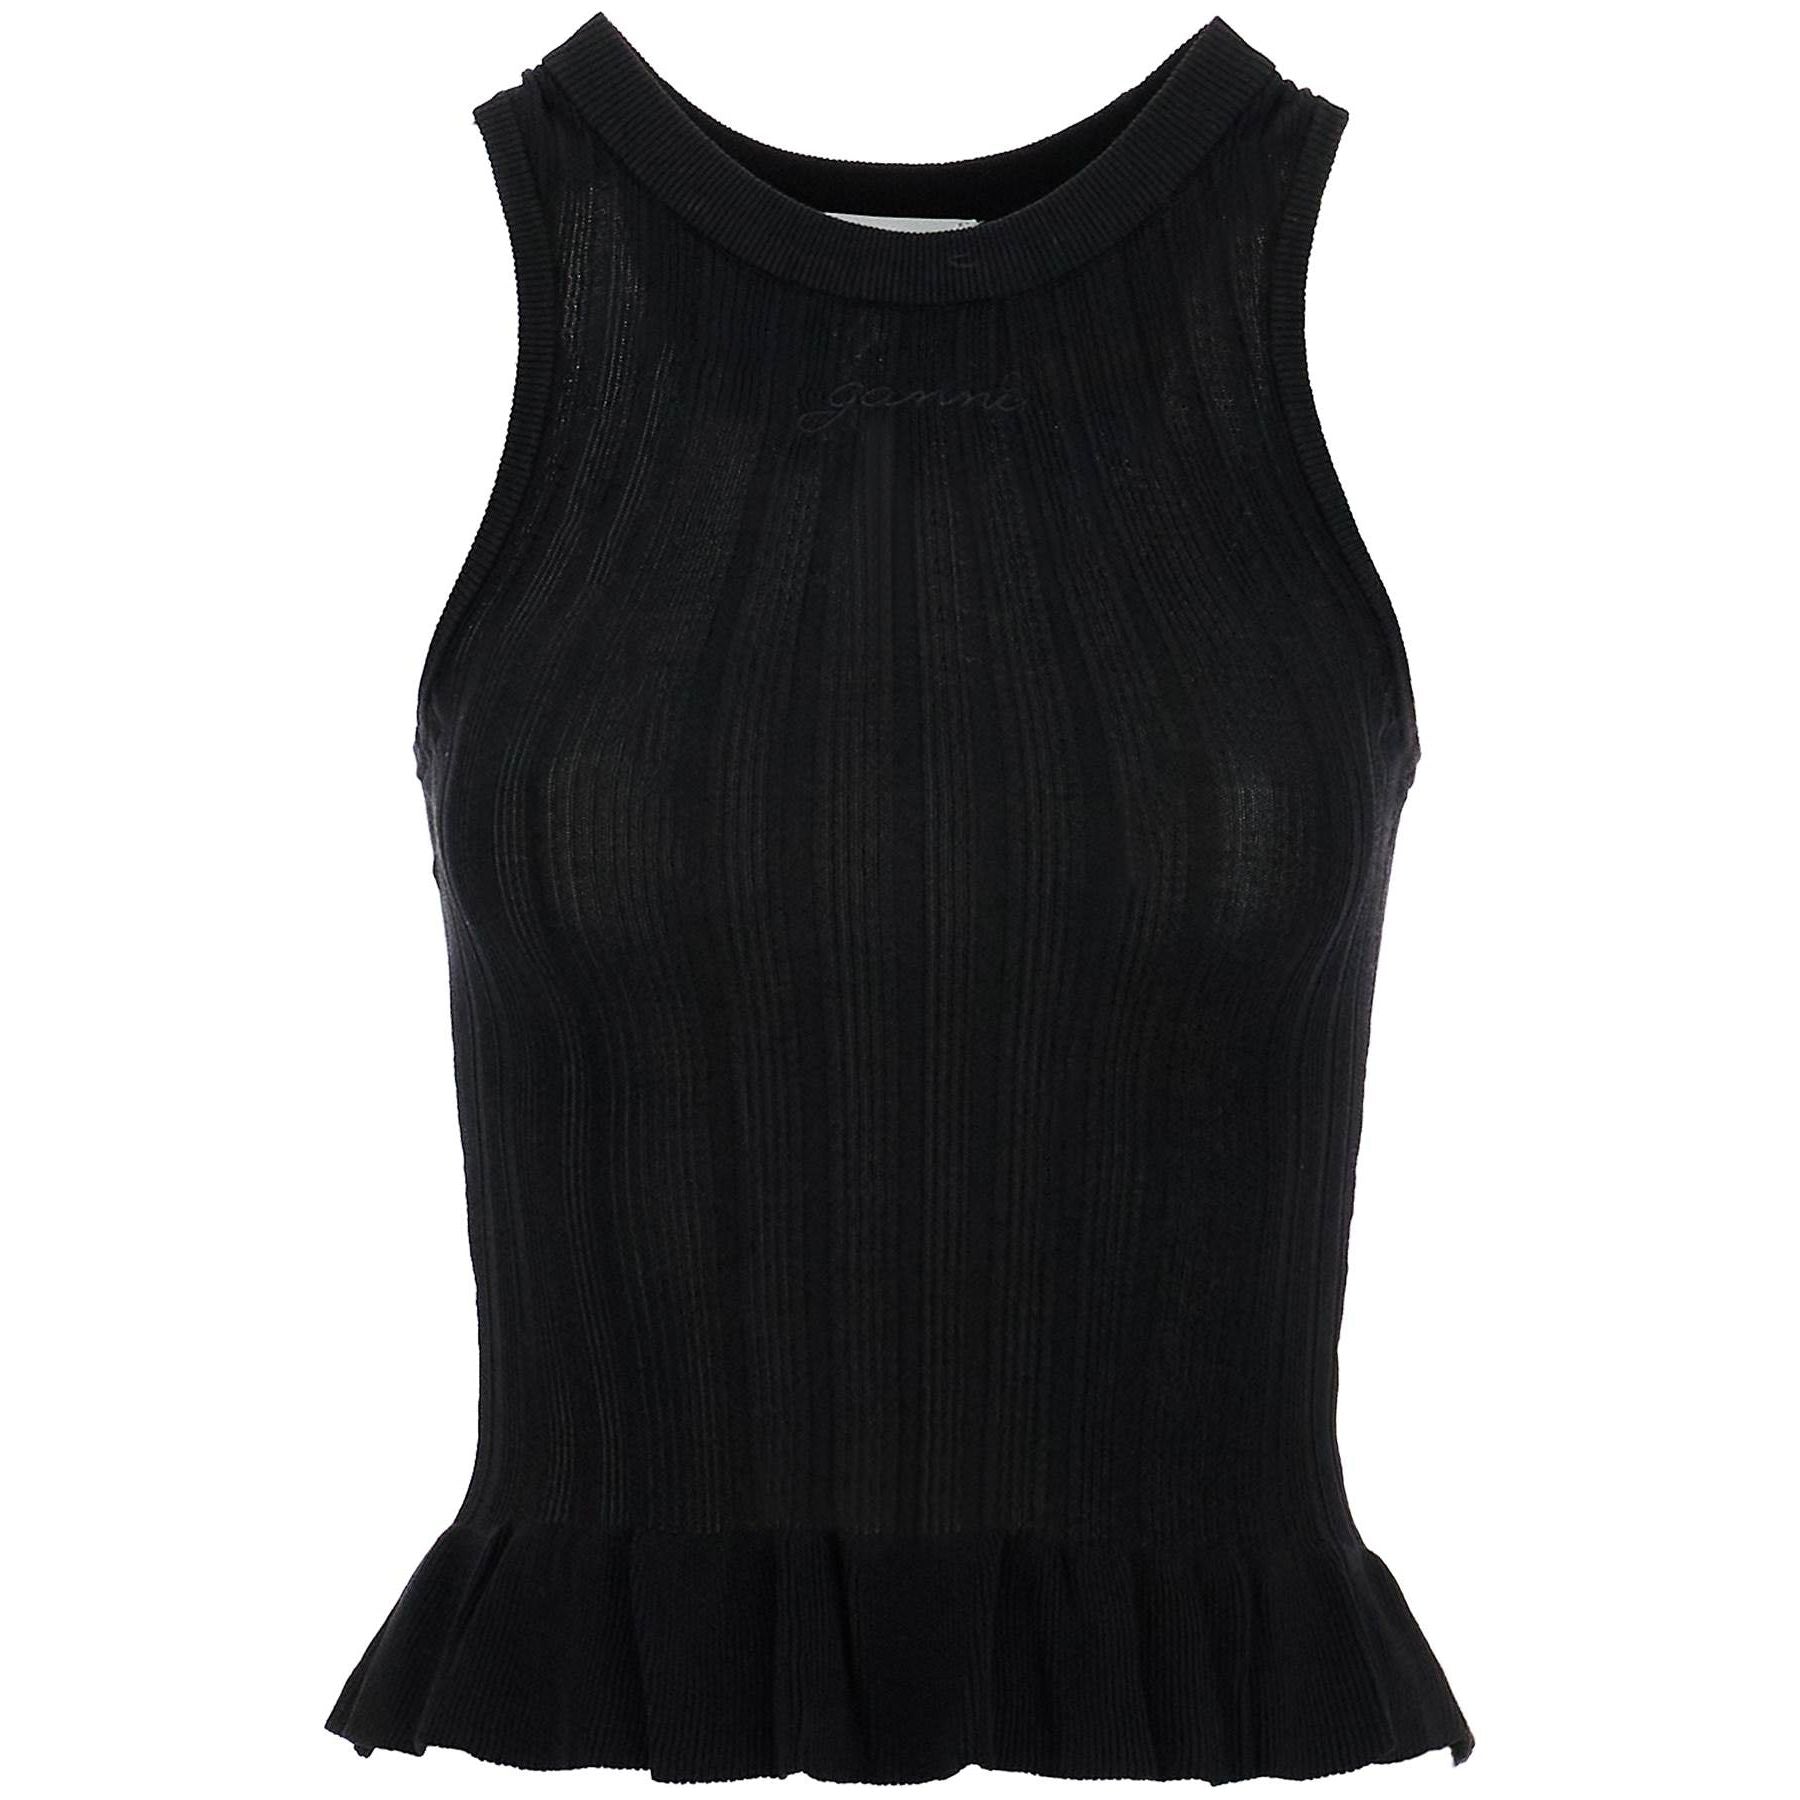 Ribbed Knit Tank Top With Spaghetti Straps